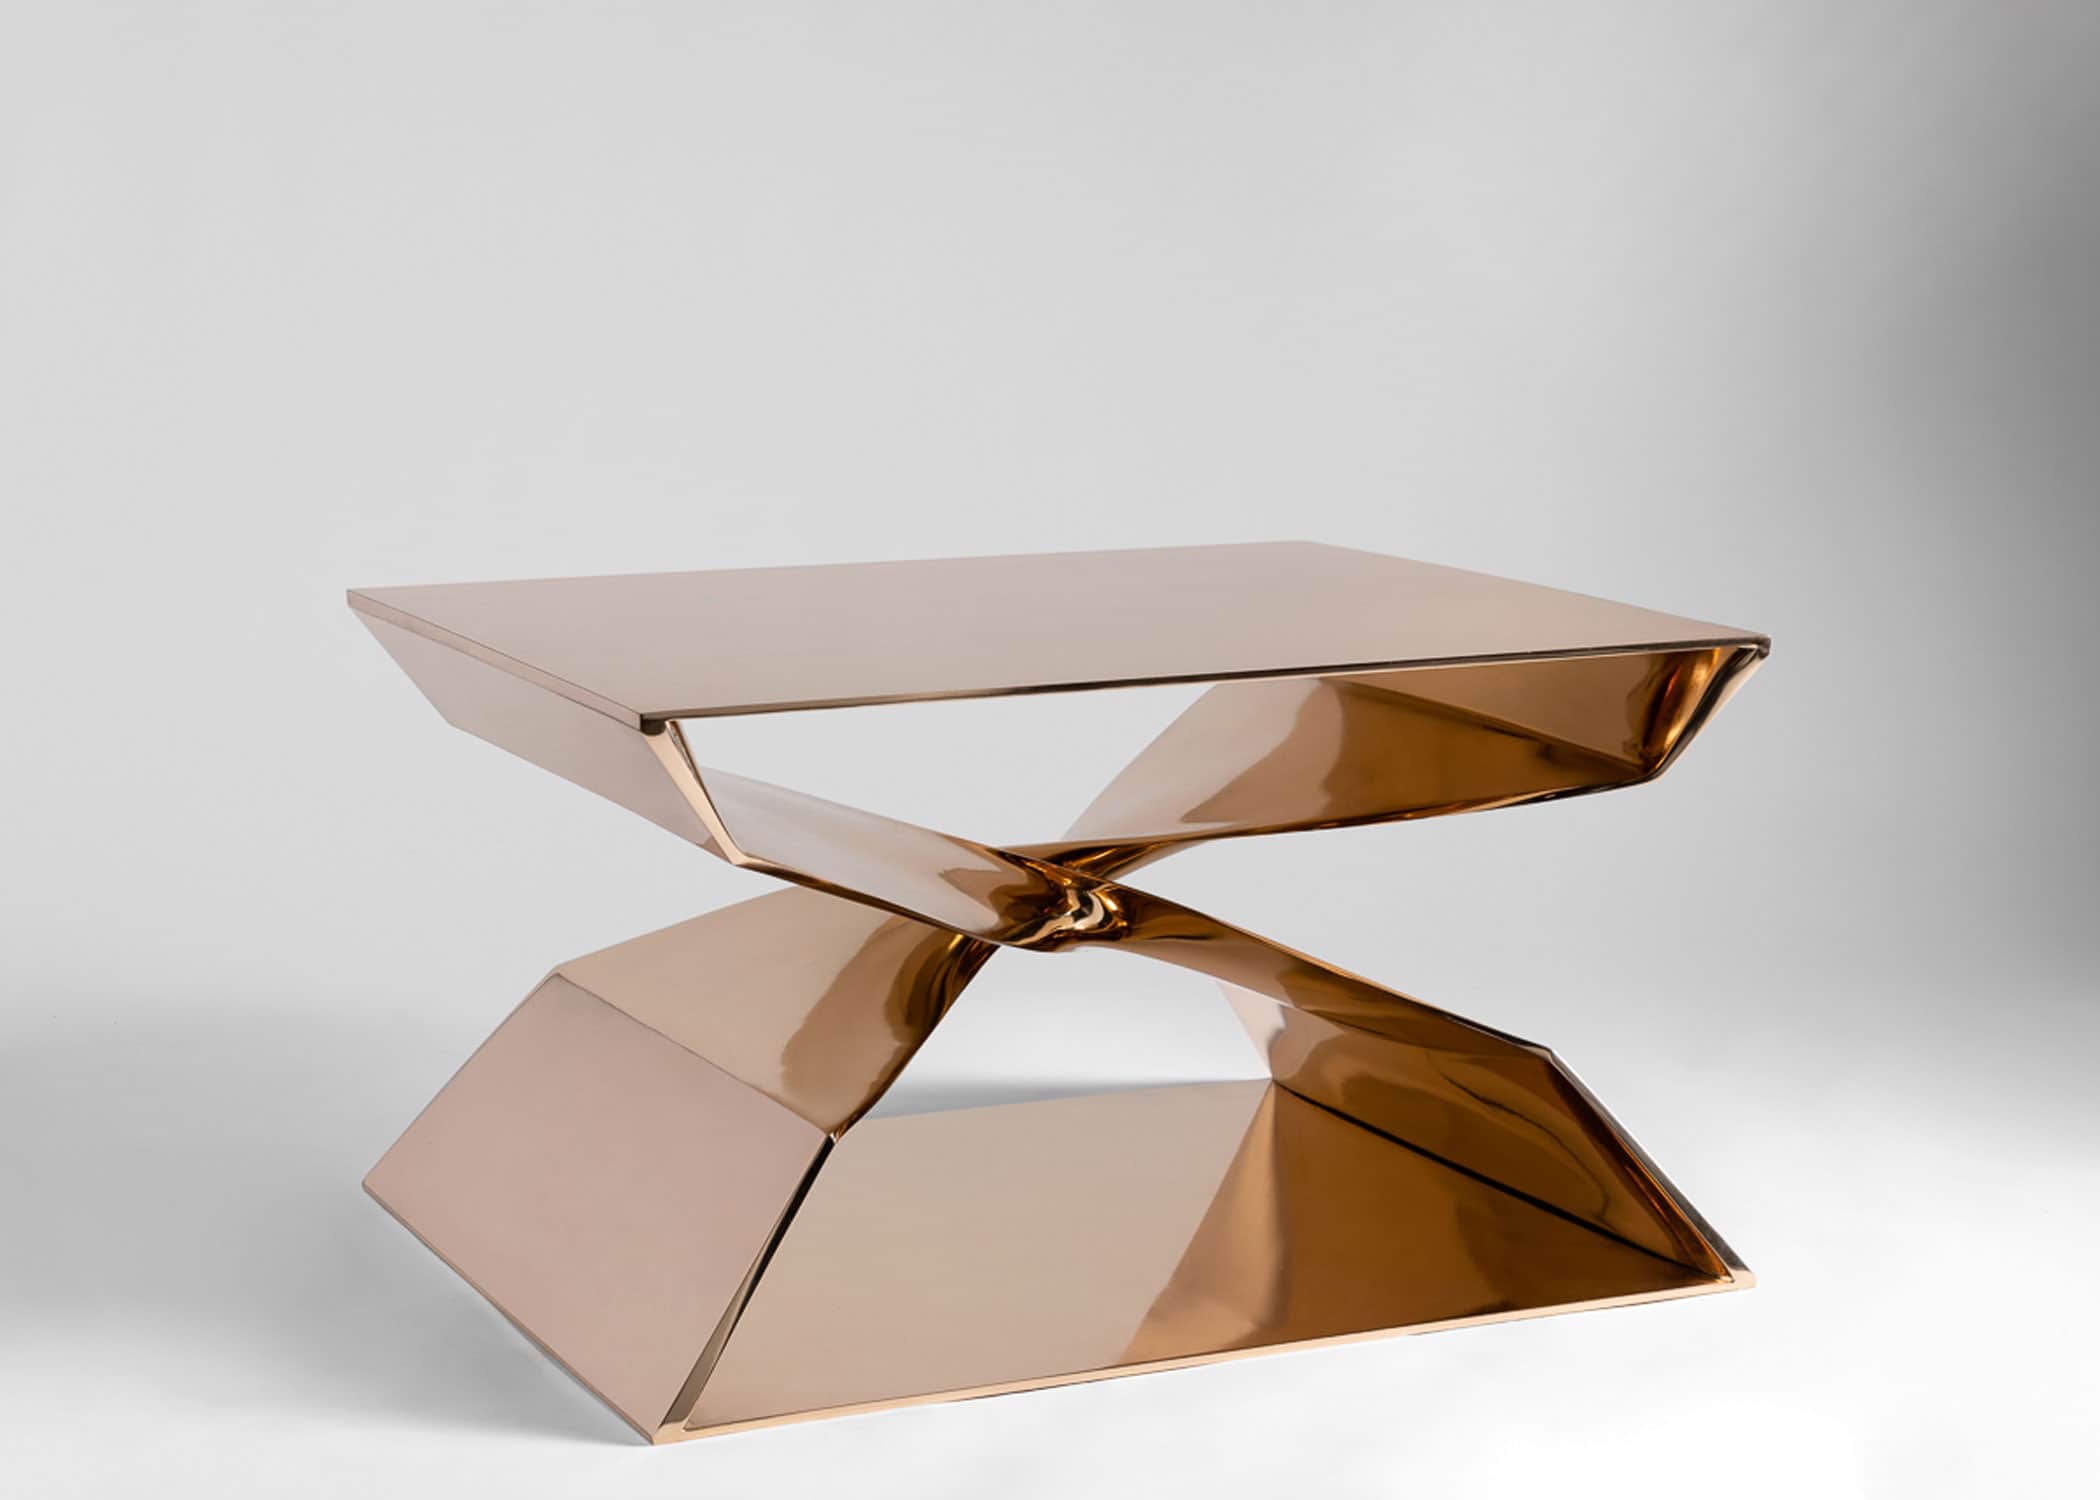 Set against a grey background this image shows the large-scale X shaped coffee table designed by carol Egan.  CE24 Cast Silicon bronze X shaped coffee table with mirror polished finish.  30" w x 24" d x 18"h.  The view shows the table placed diagonally.